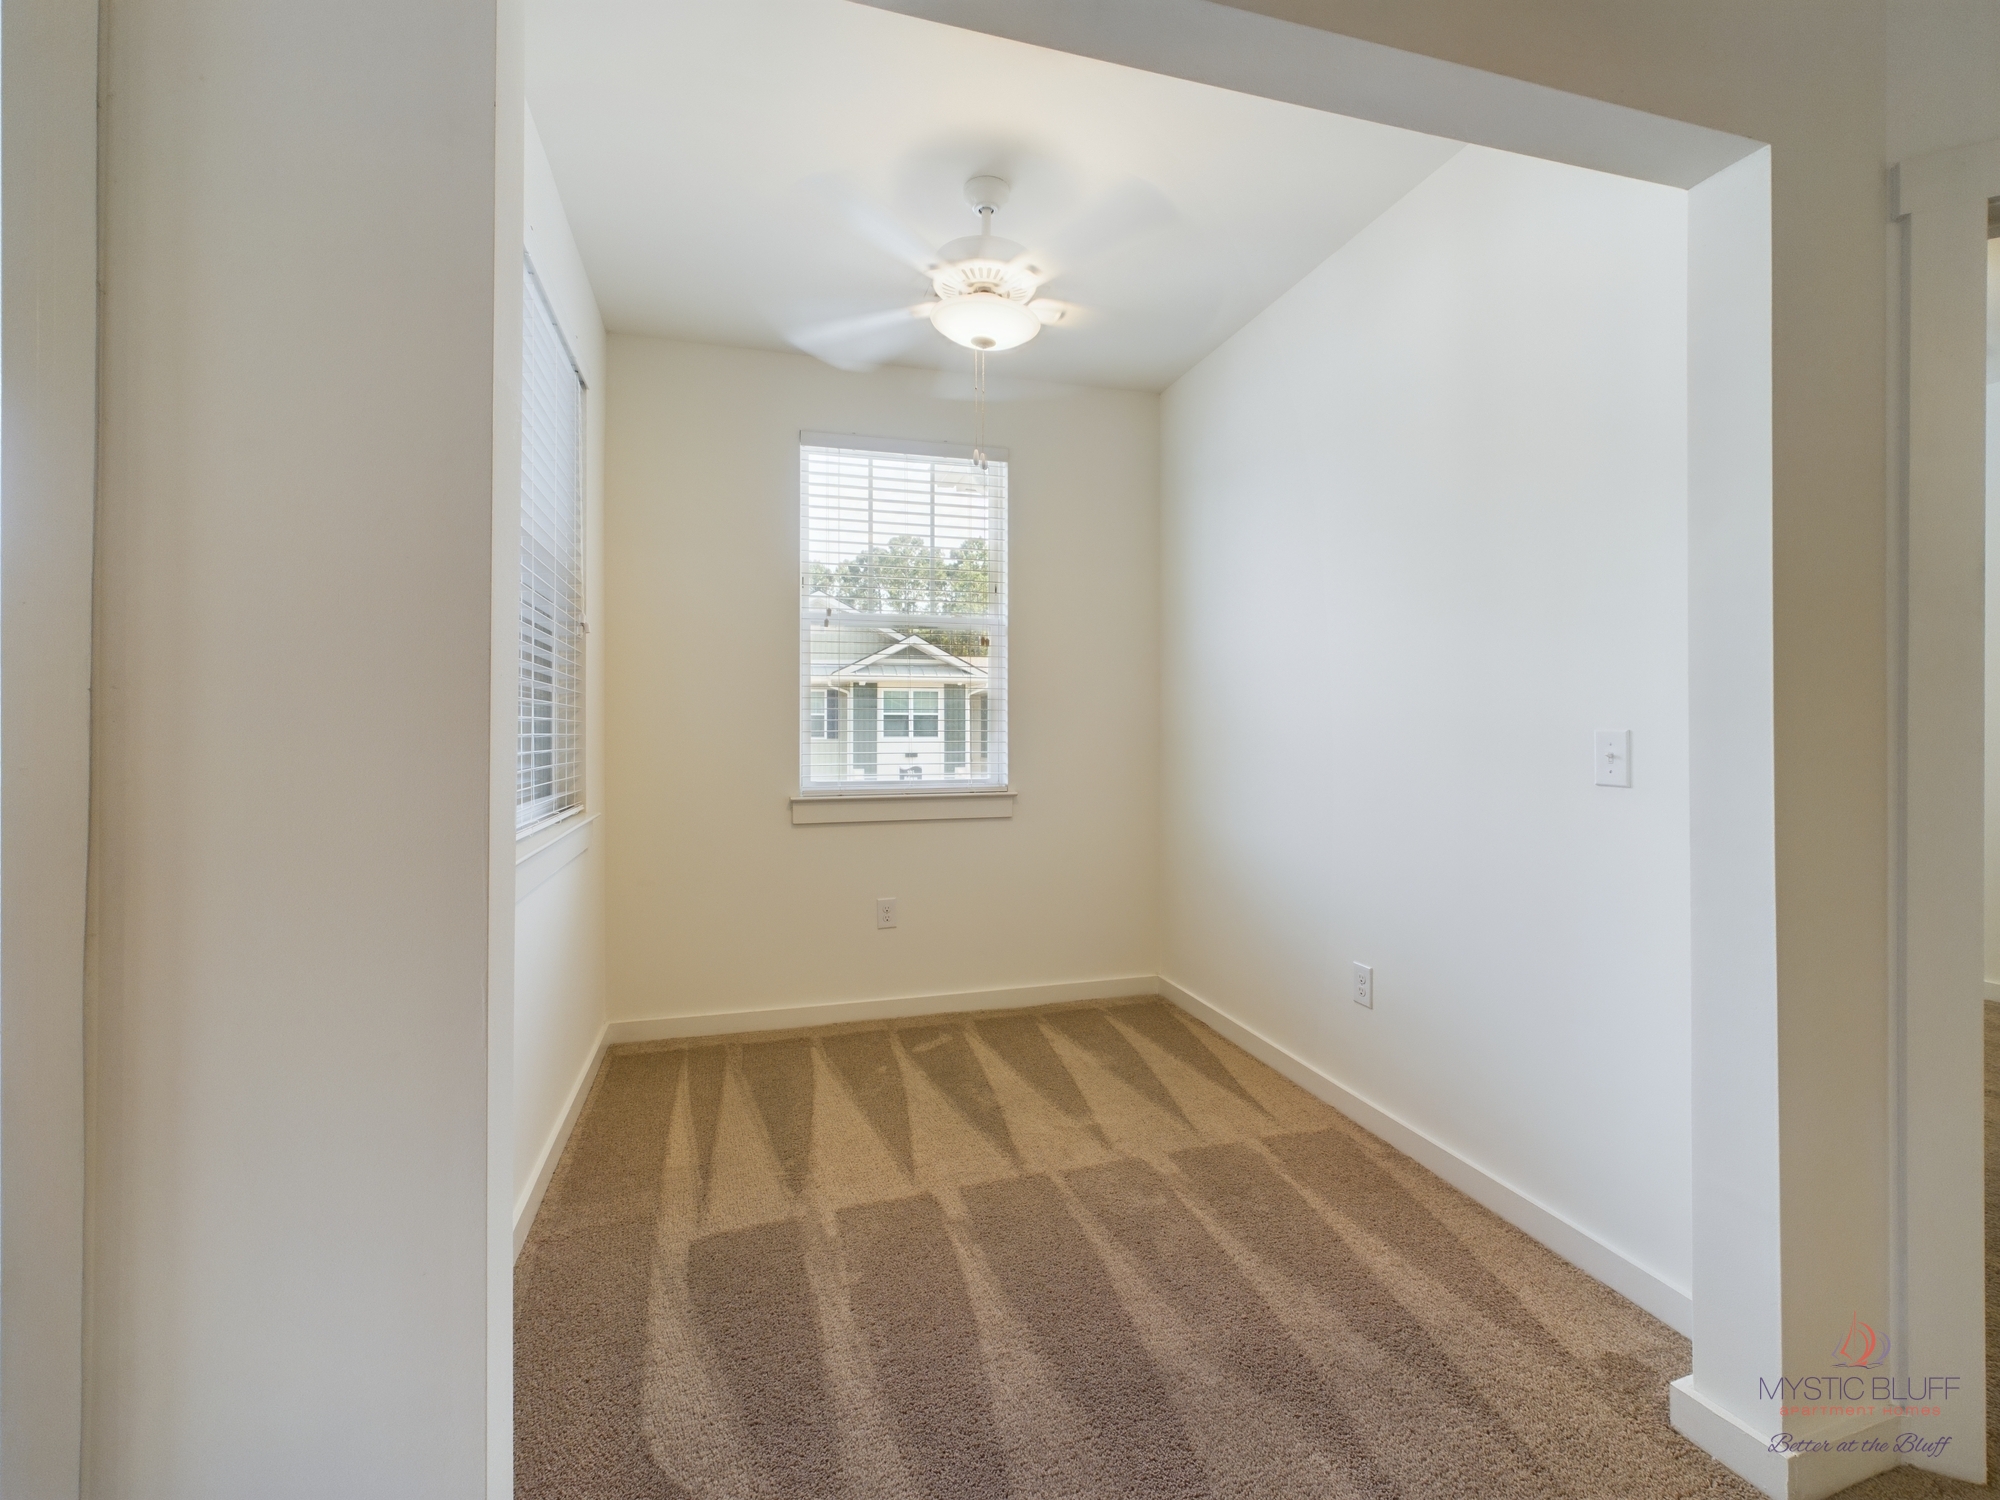 An empty apartment with a ceiling fan and carpet.